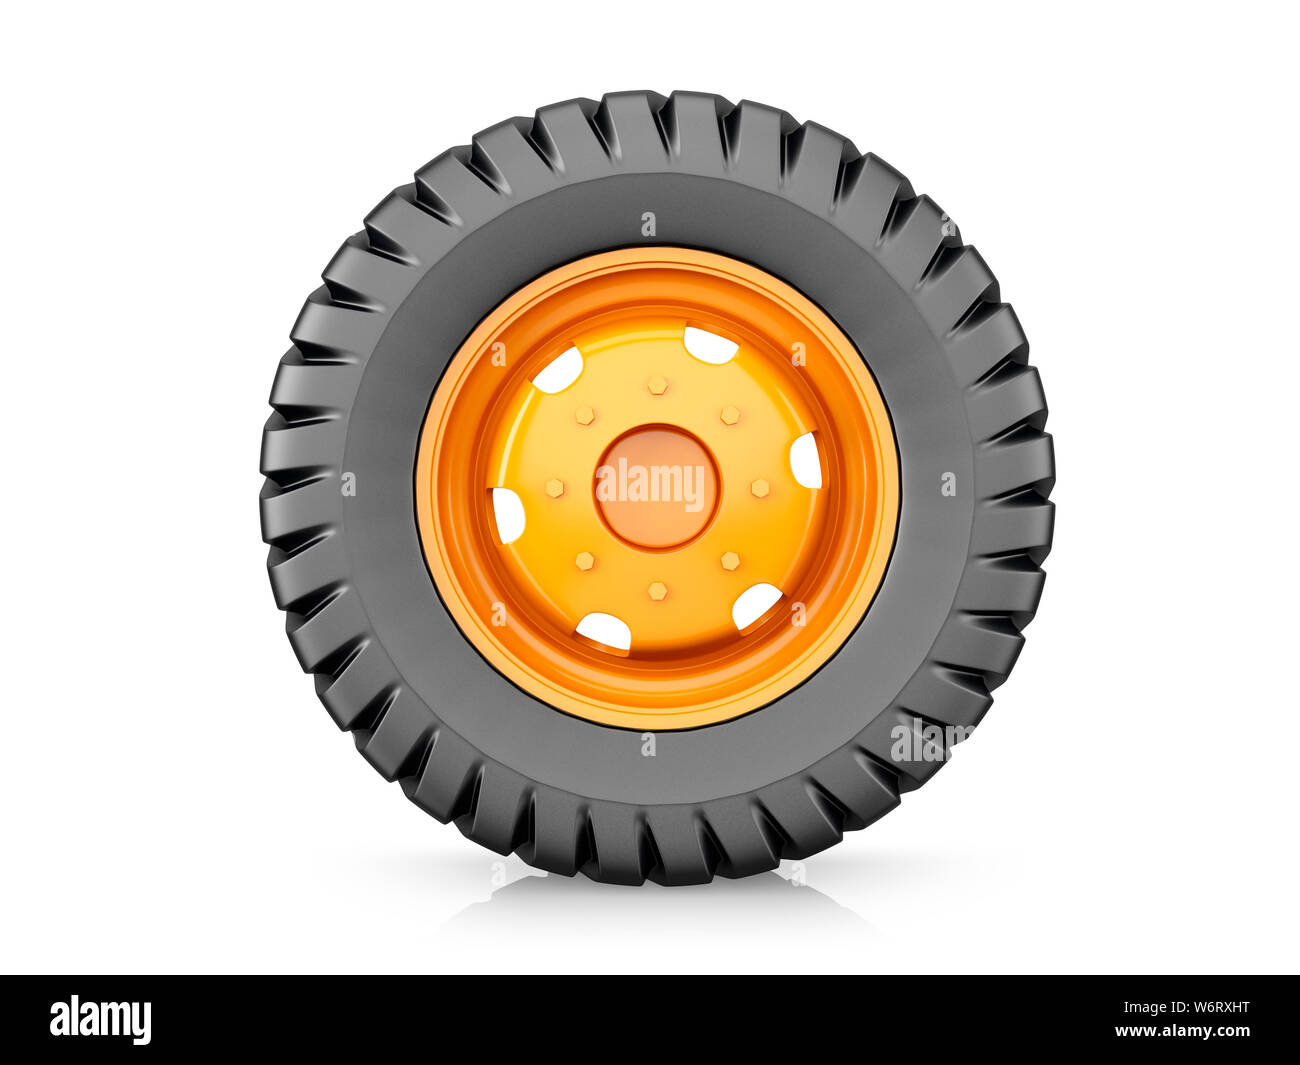 Agricultural machinery wheel, illustration. Stock Photo